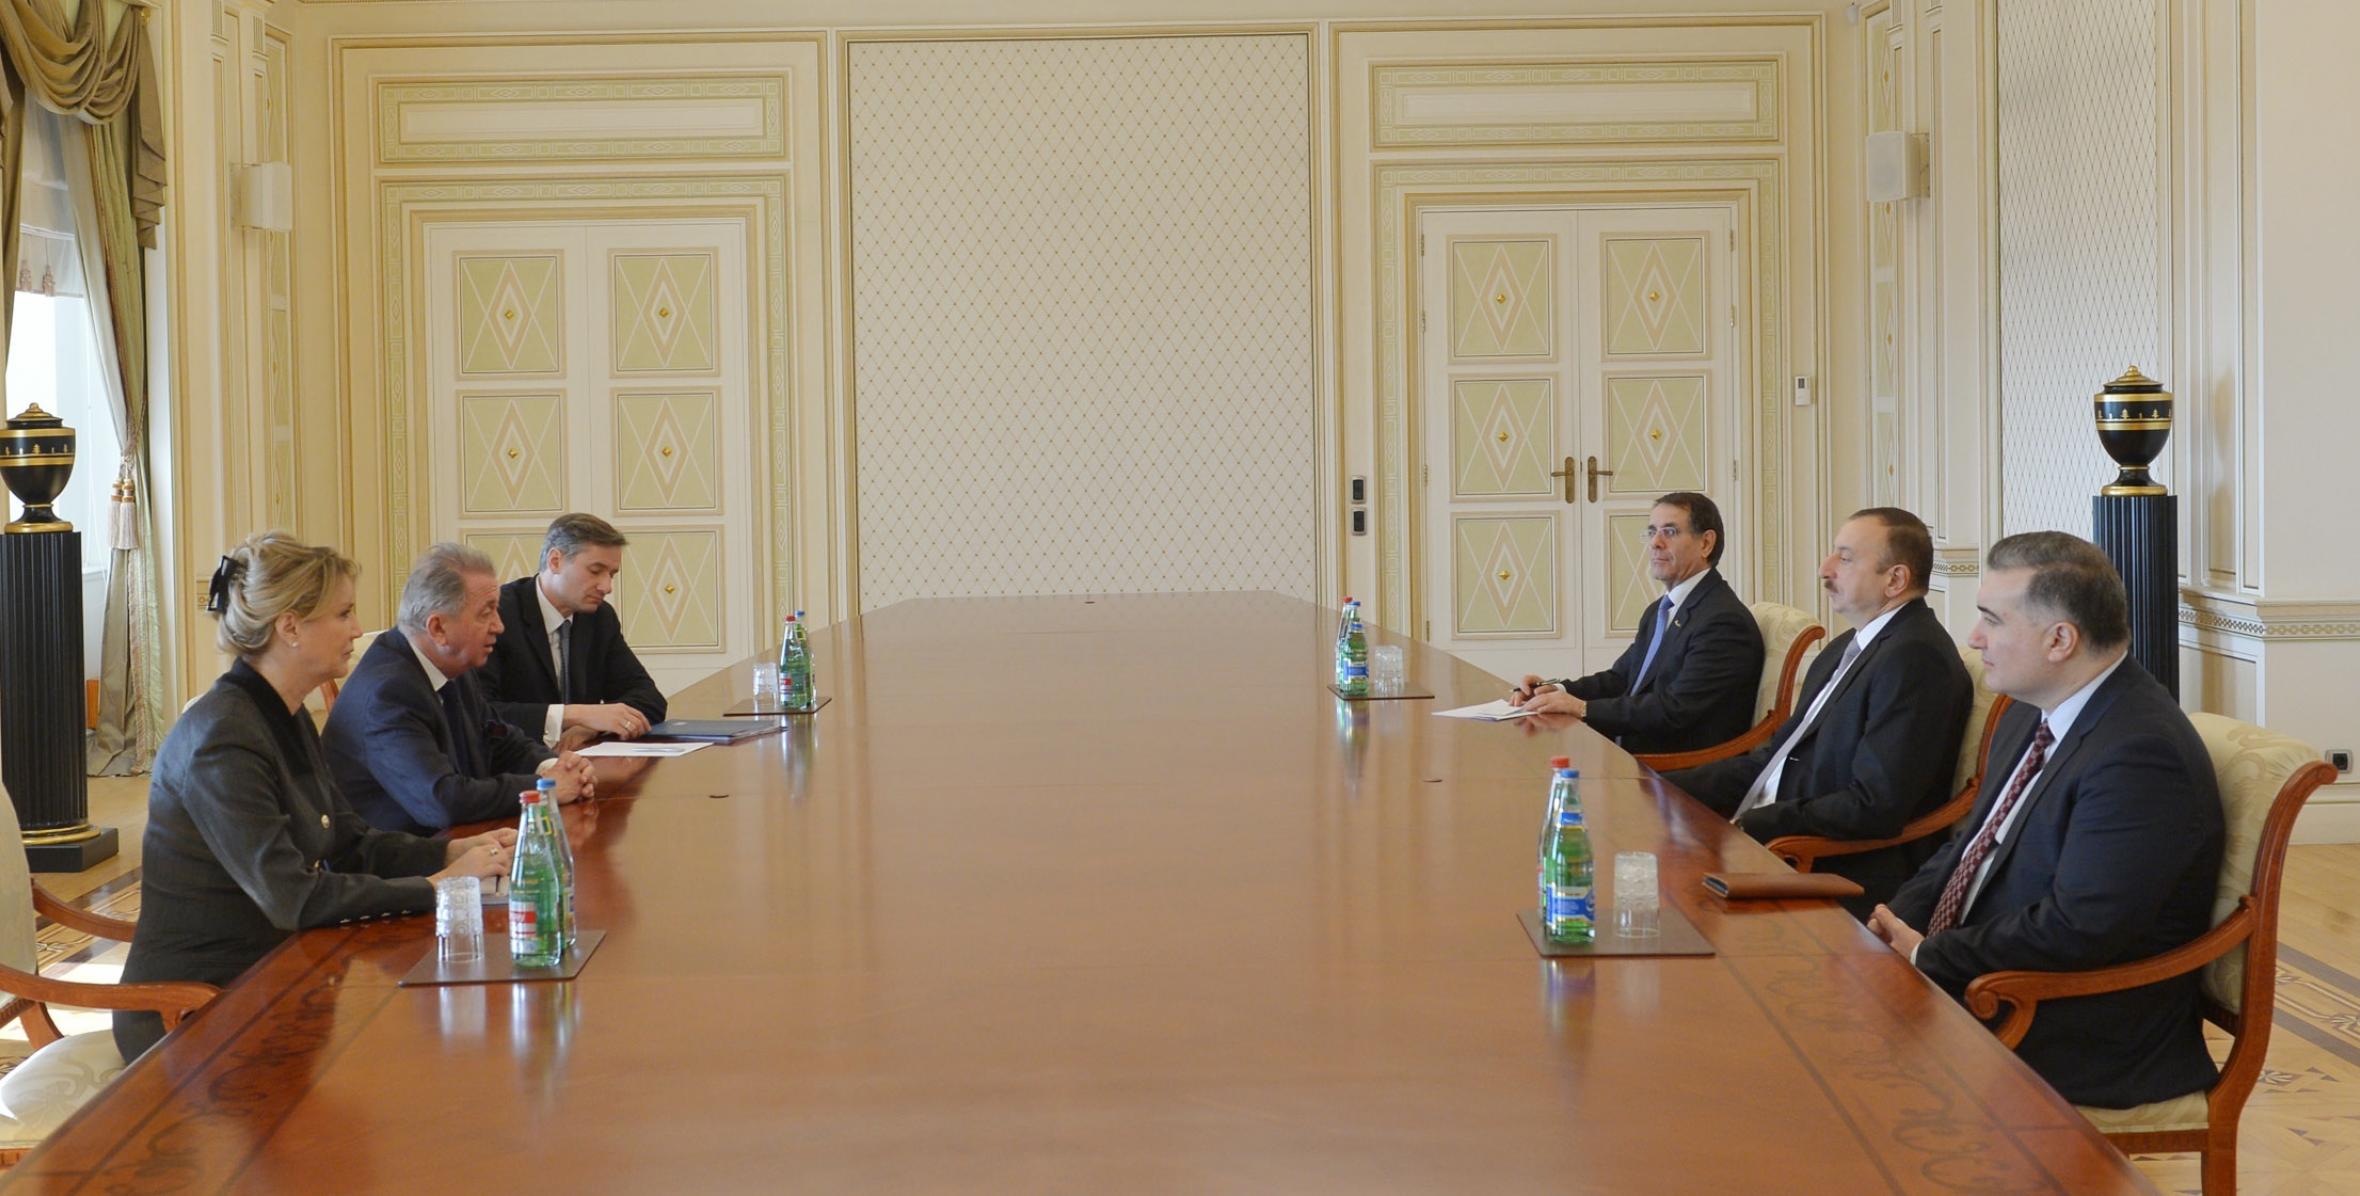 Ilham Aliyev received a delegation led by the President of the International Peace Institute